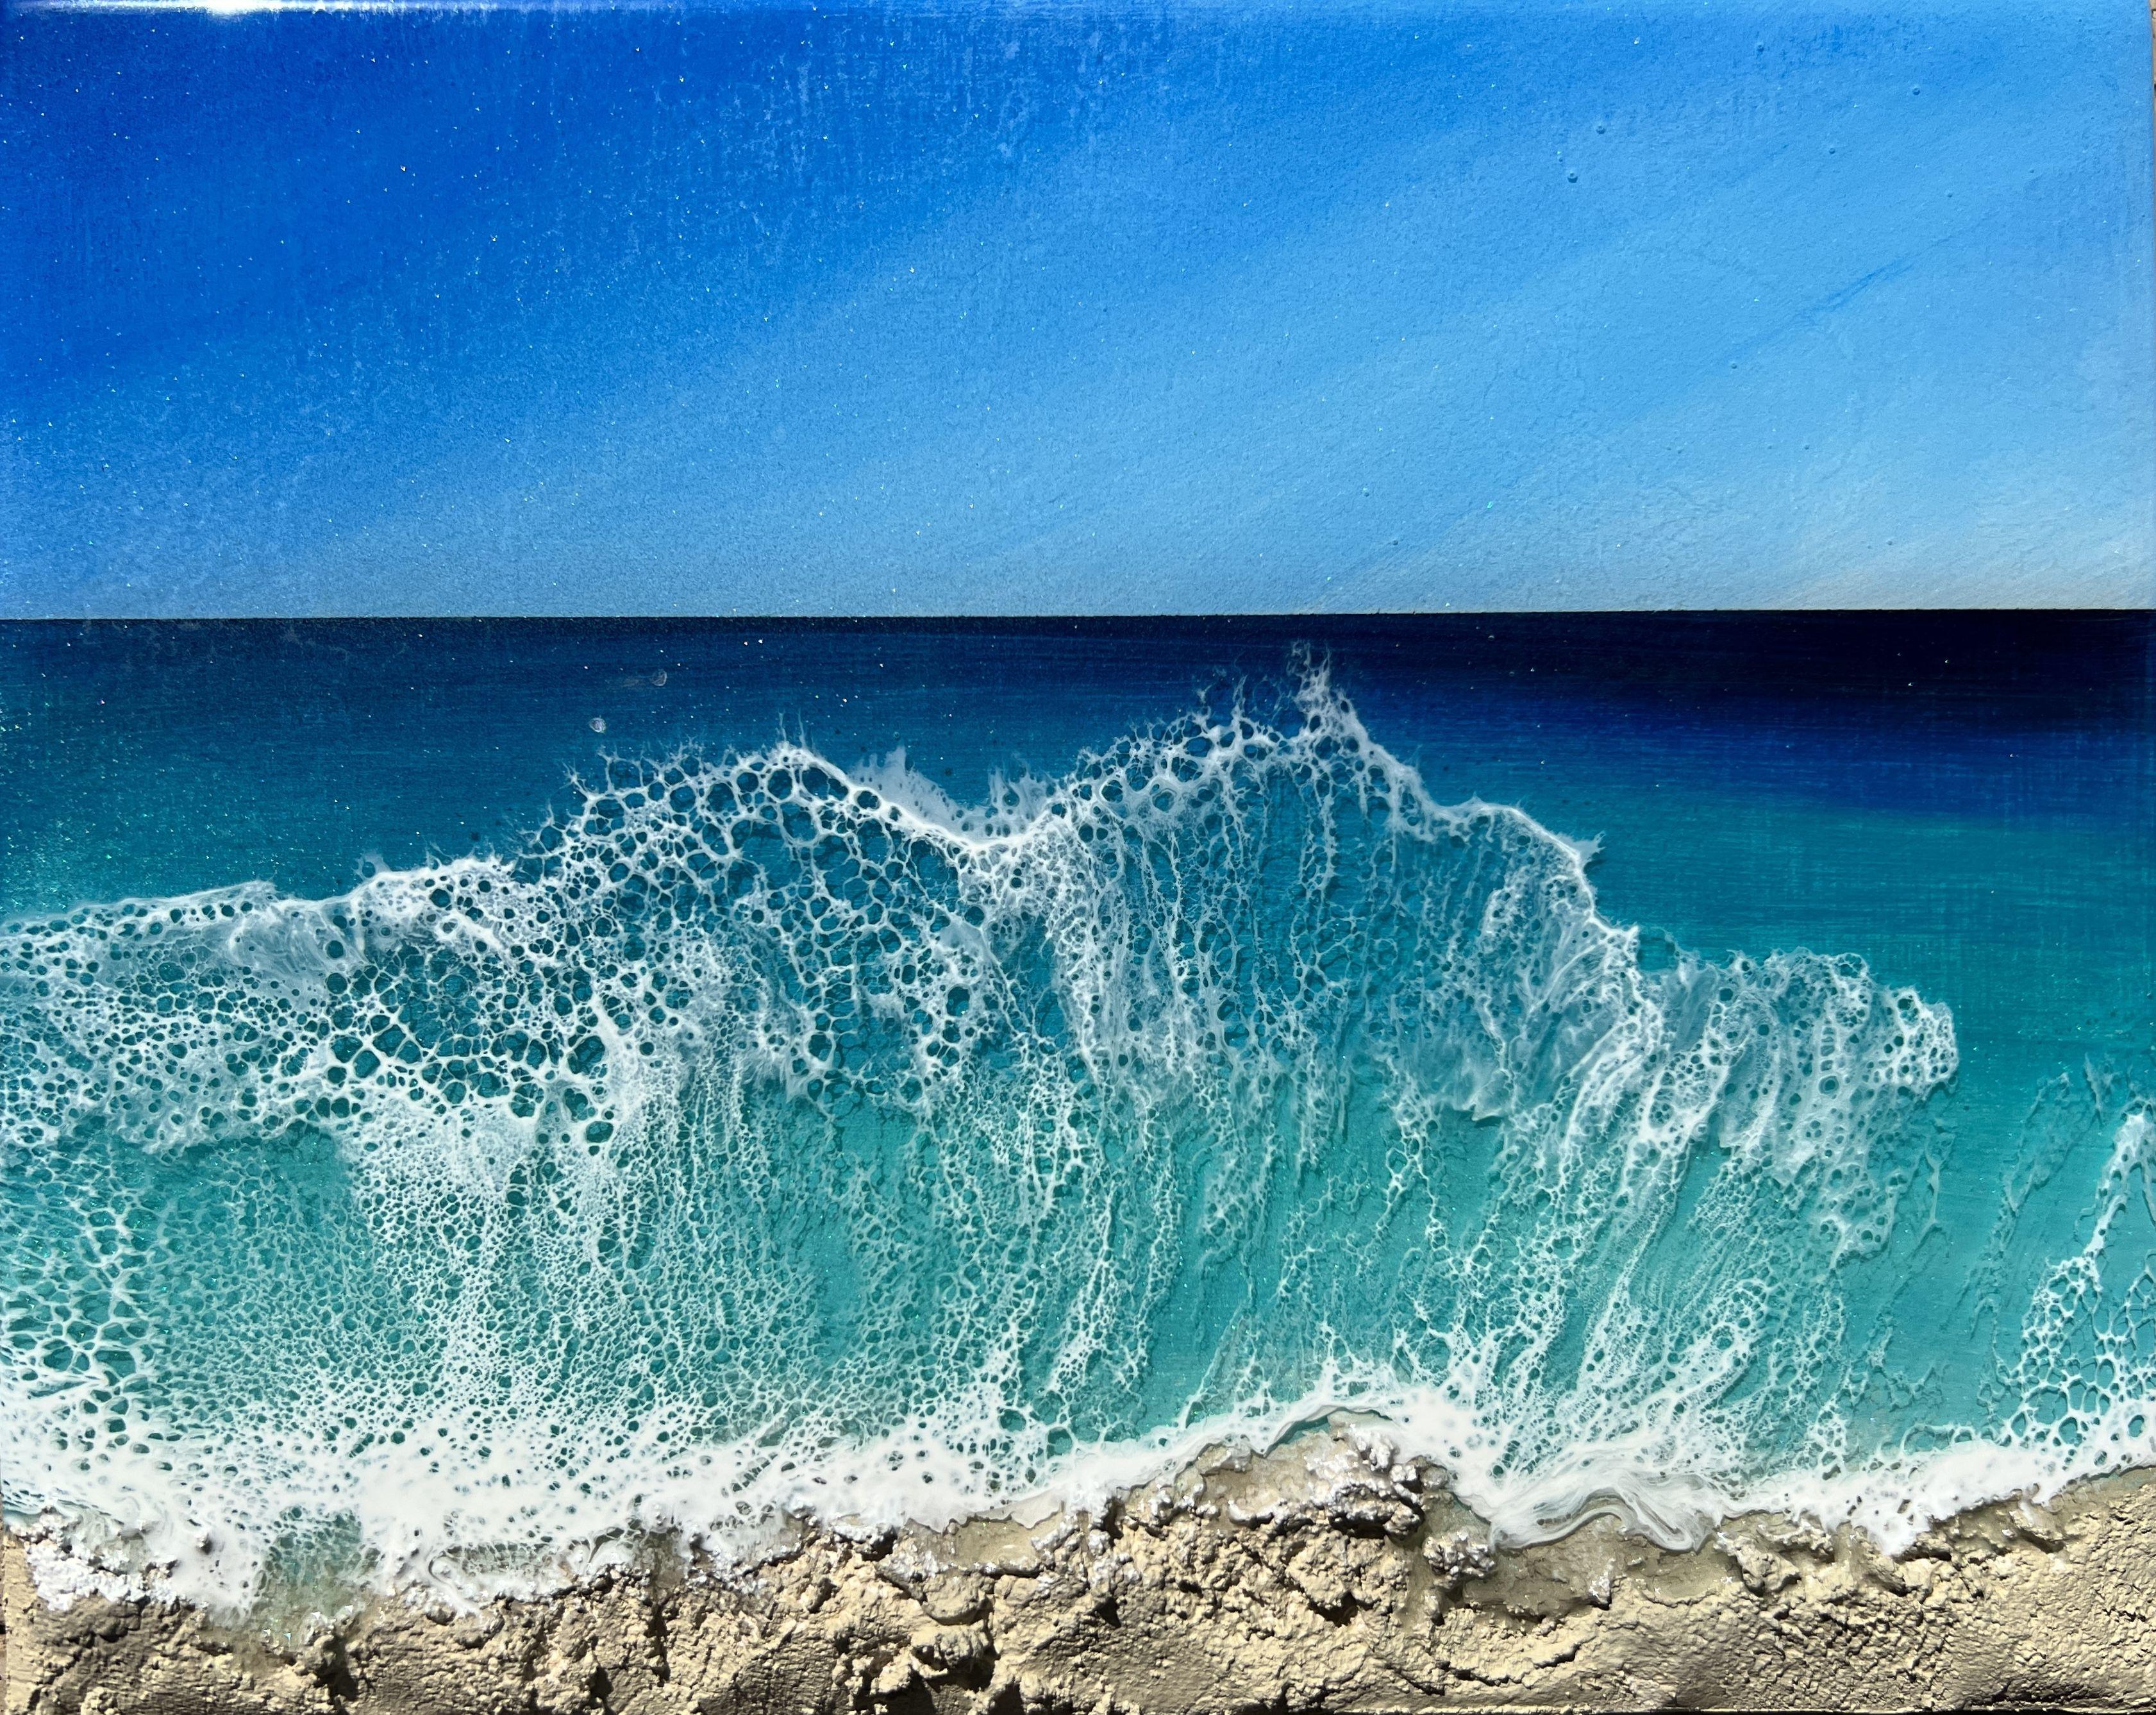 Original unique turquoise and gold ocean painting inspired by the Bahamas ocean colors    Different shades of blue, green, turquoise, teal, aqua, gold and white  This painting does not need to be framed, the painted image is extended around all four